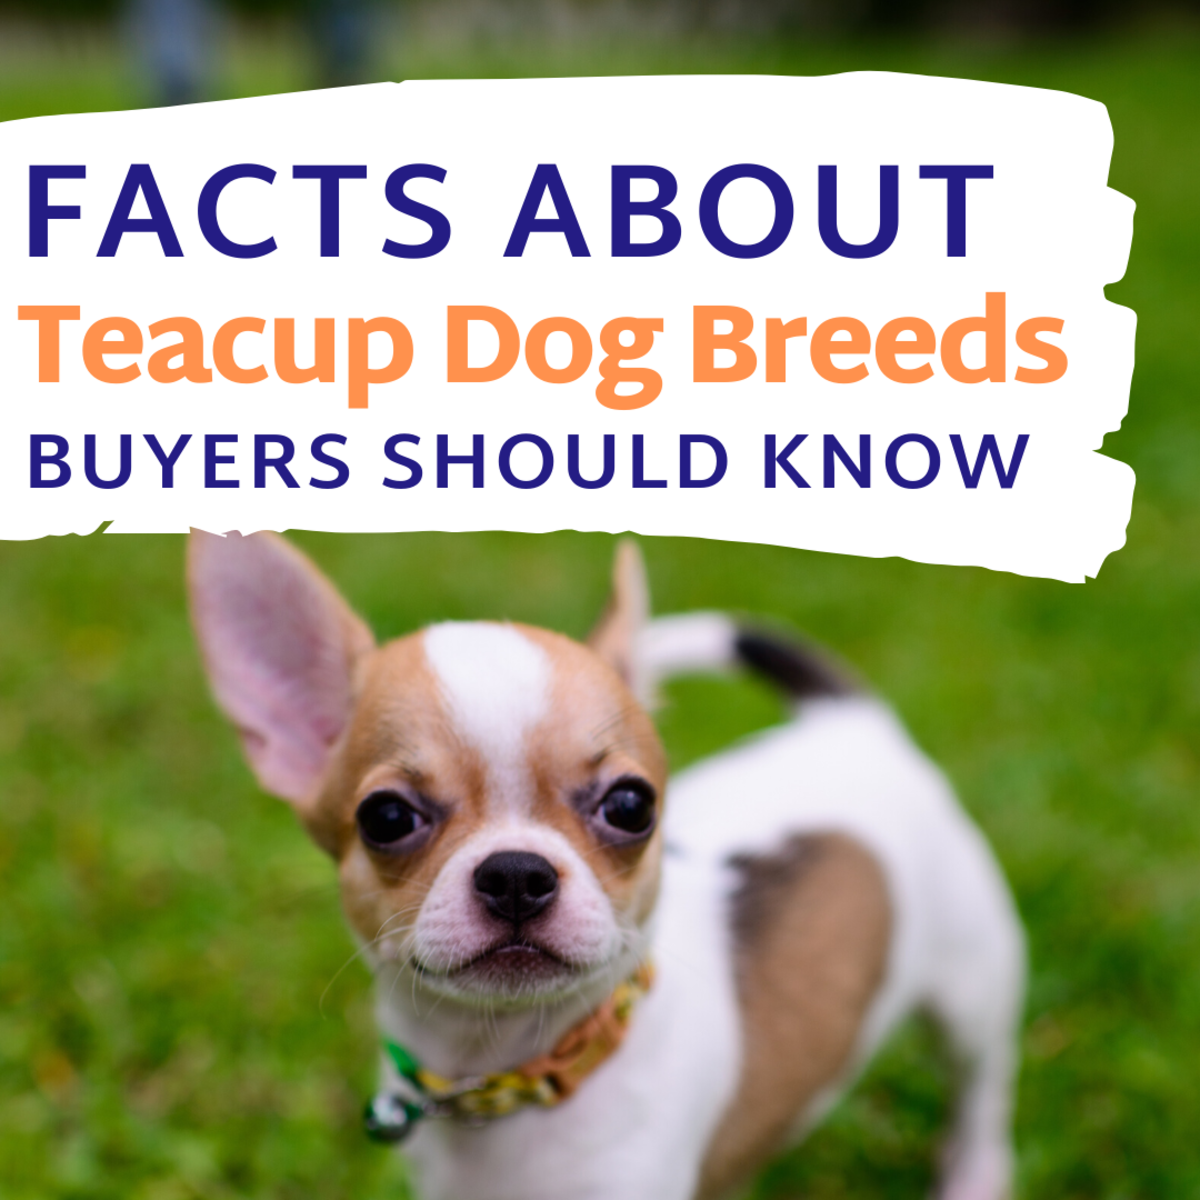 Facts About Teacup Dog Breeds Prospective Buyers Should
Know